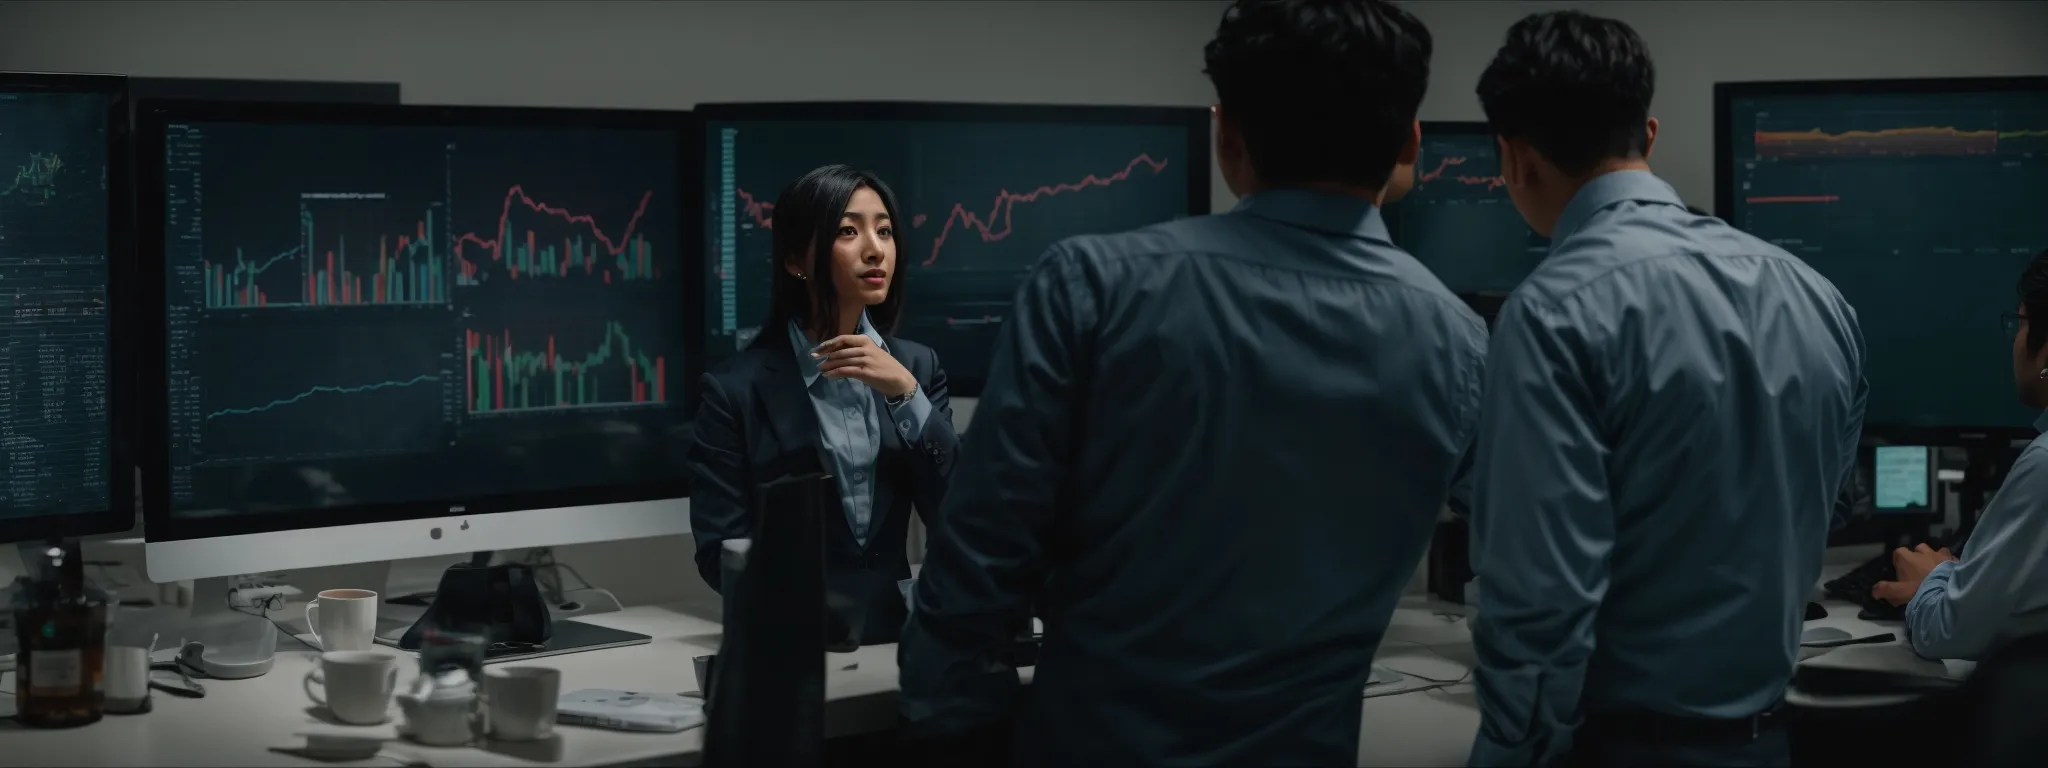 a marketer presents a strategy to a team beside a bright computer screen showing web analytics.